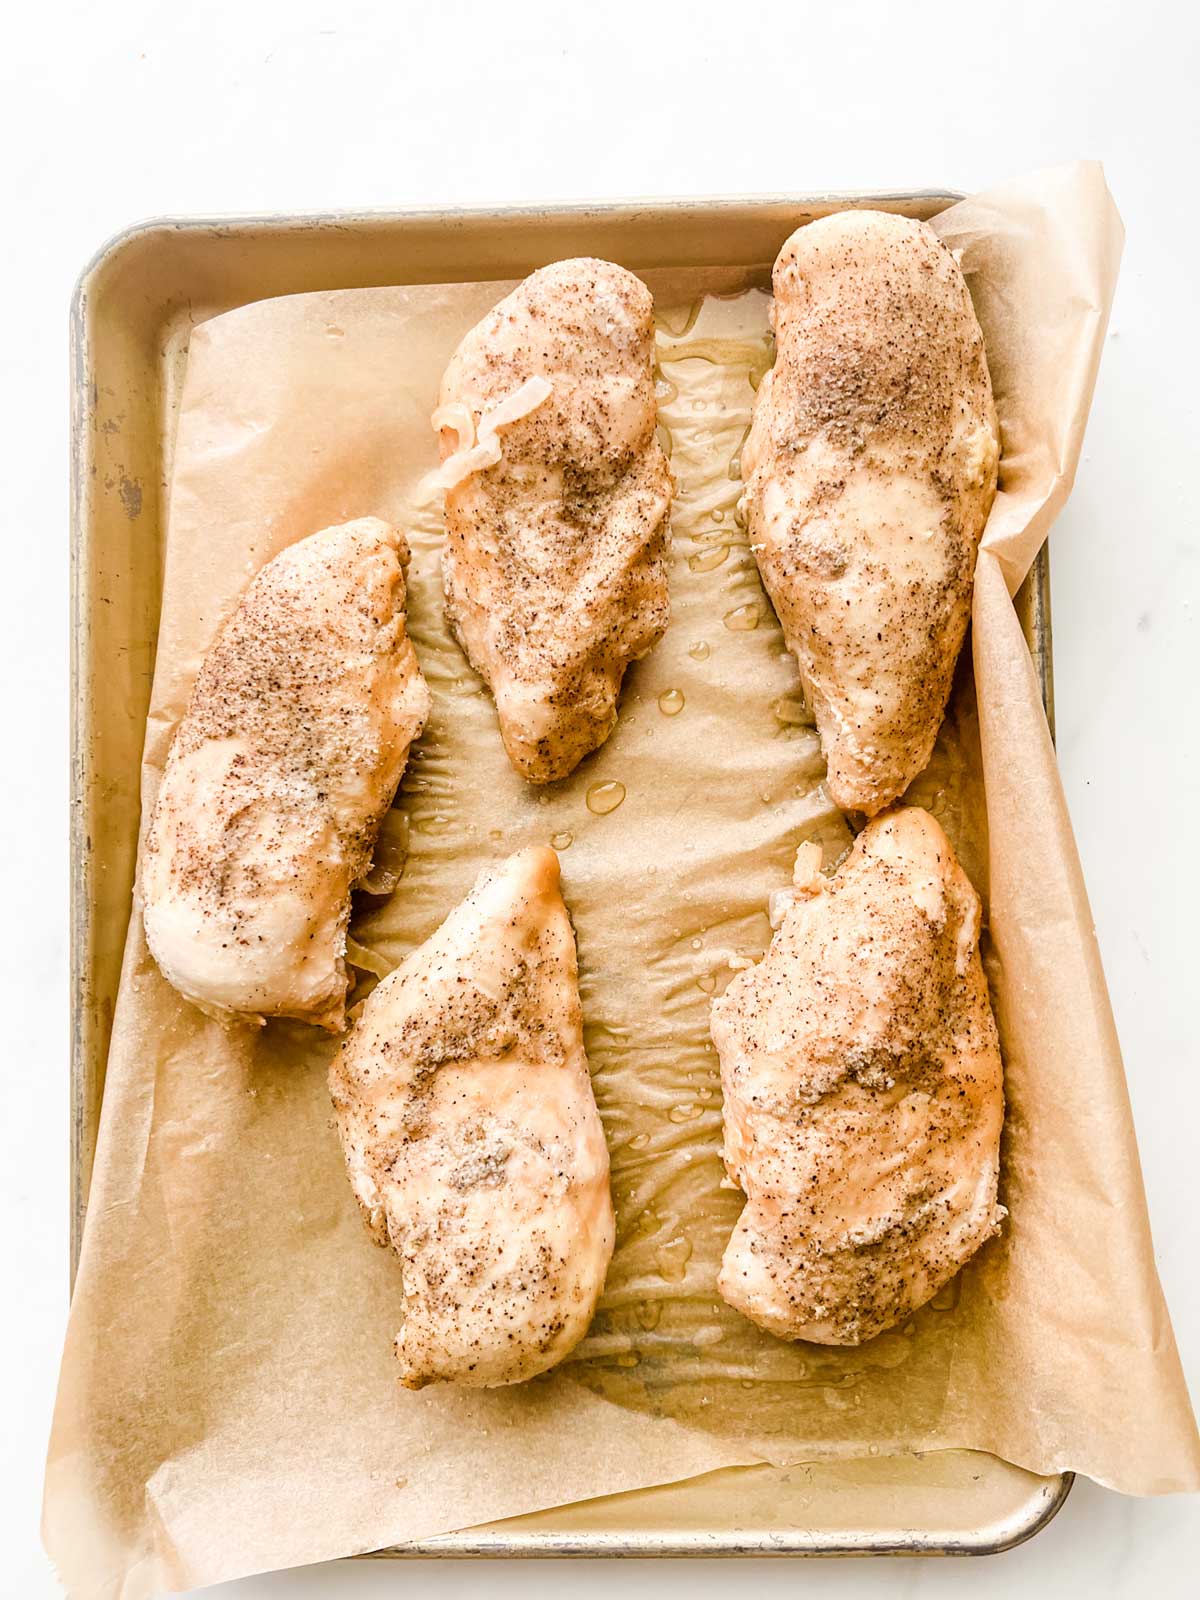 Chicken on a parchment lined baking sheet.